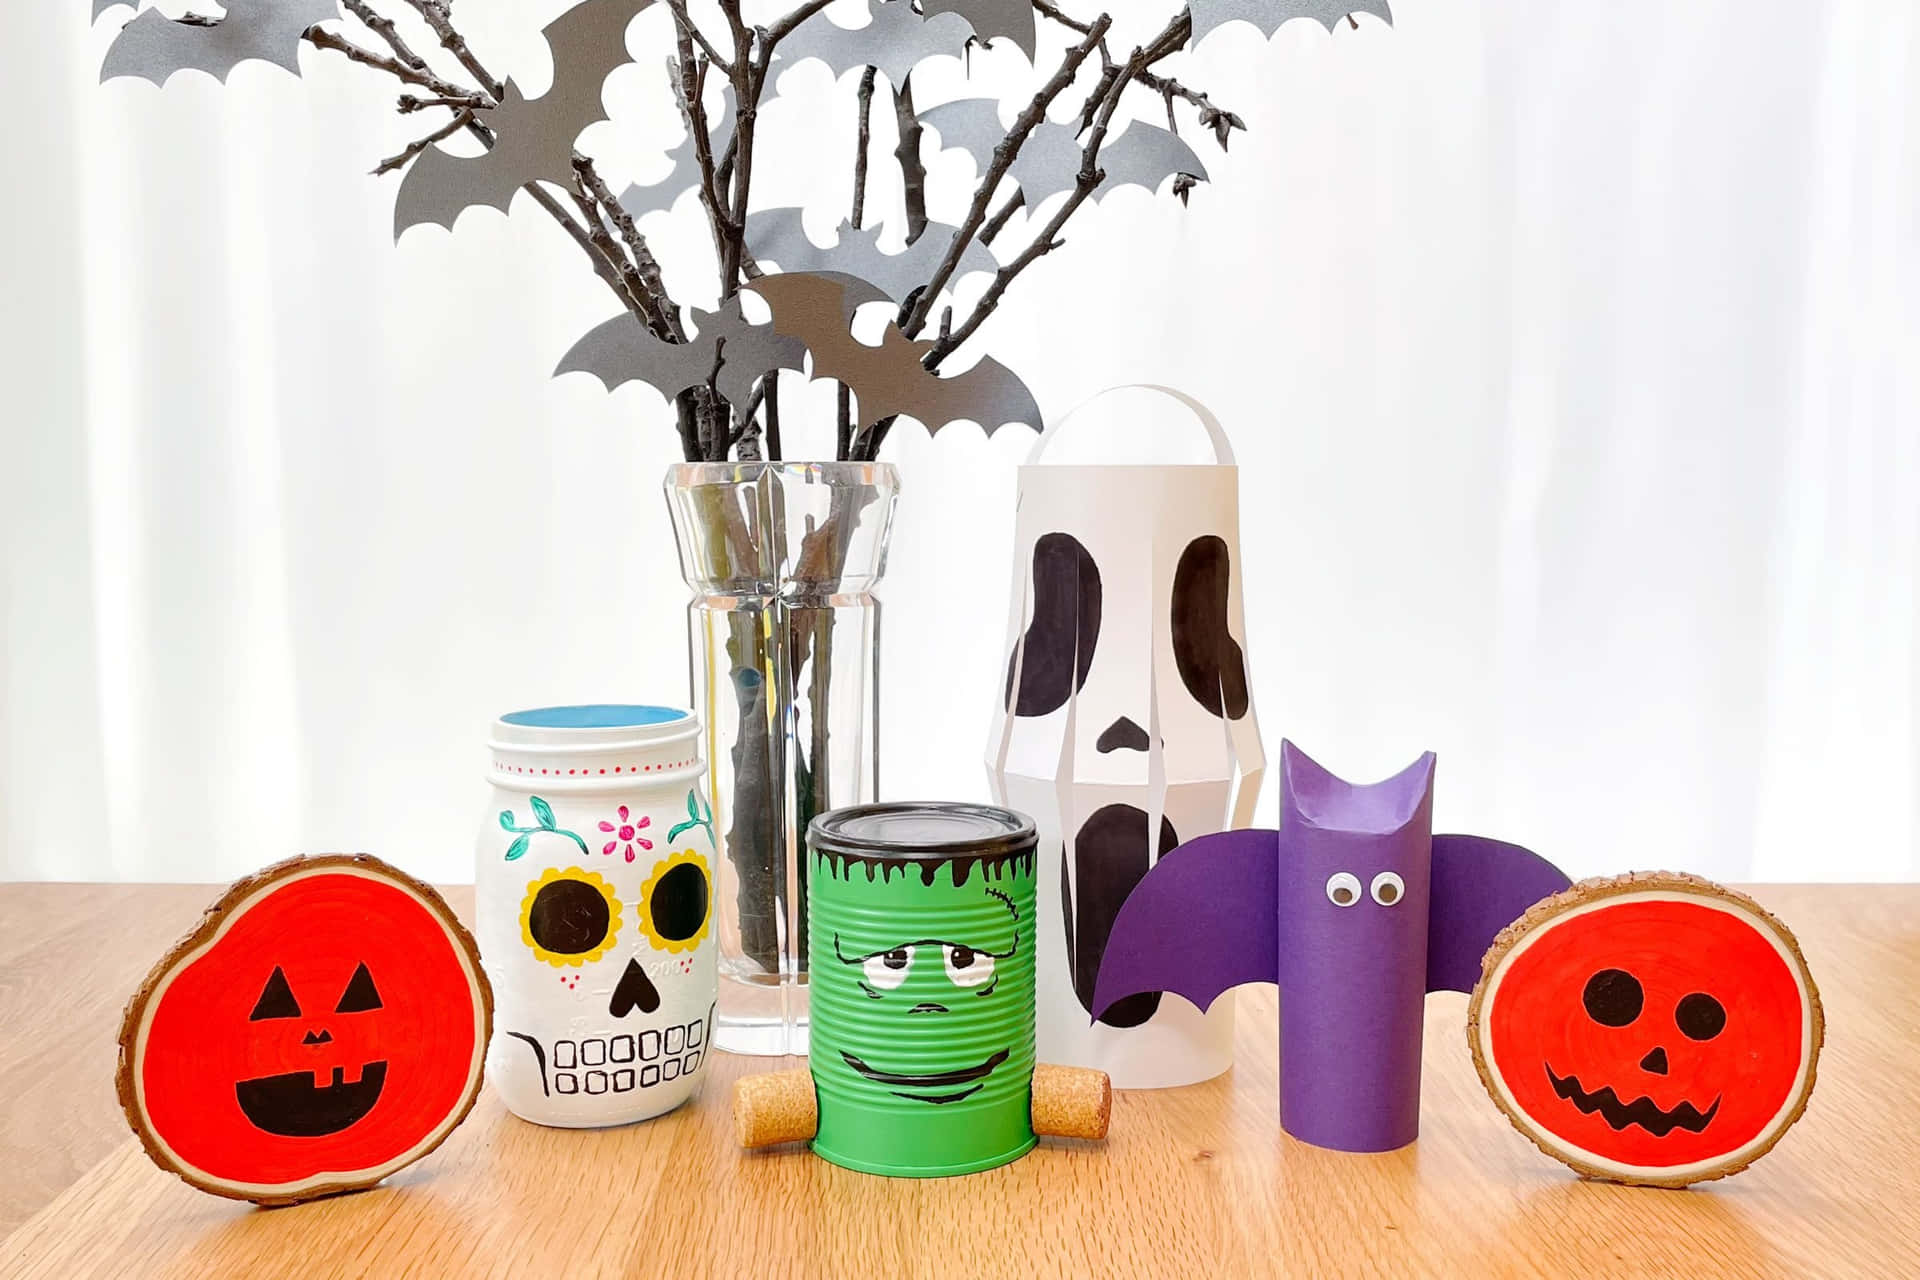 Spooky Fun Abounds with these Halloween Props Wallpaper